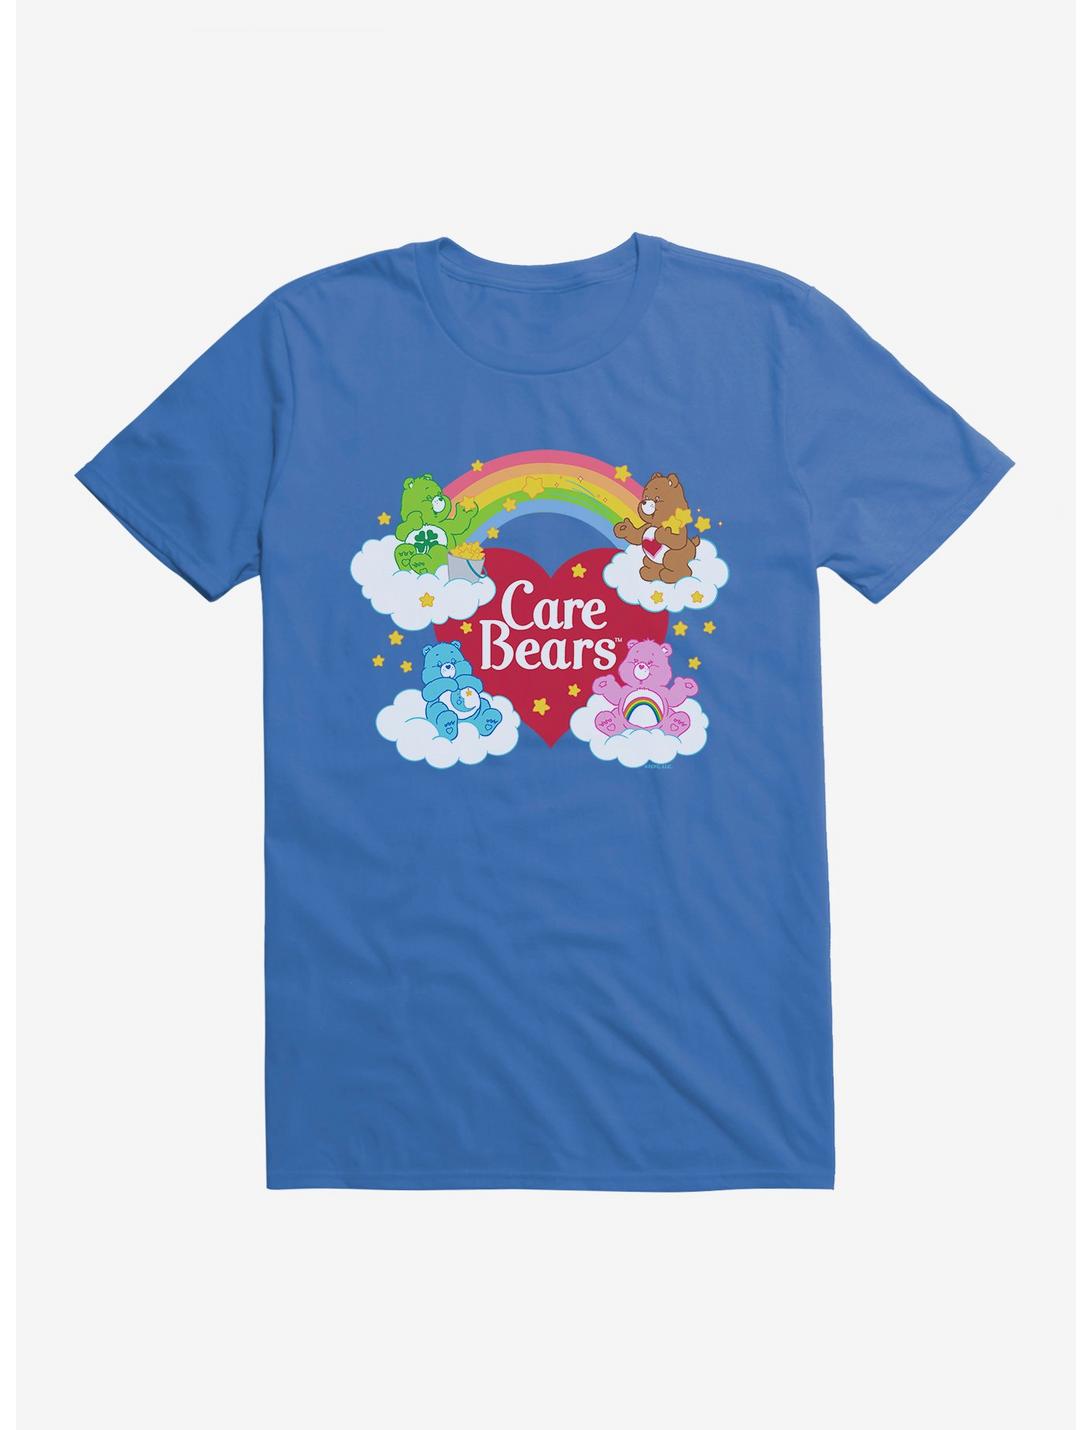 Care Bears Friends On Clouds T-Shirt, ROYAL BLUE, hi-res